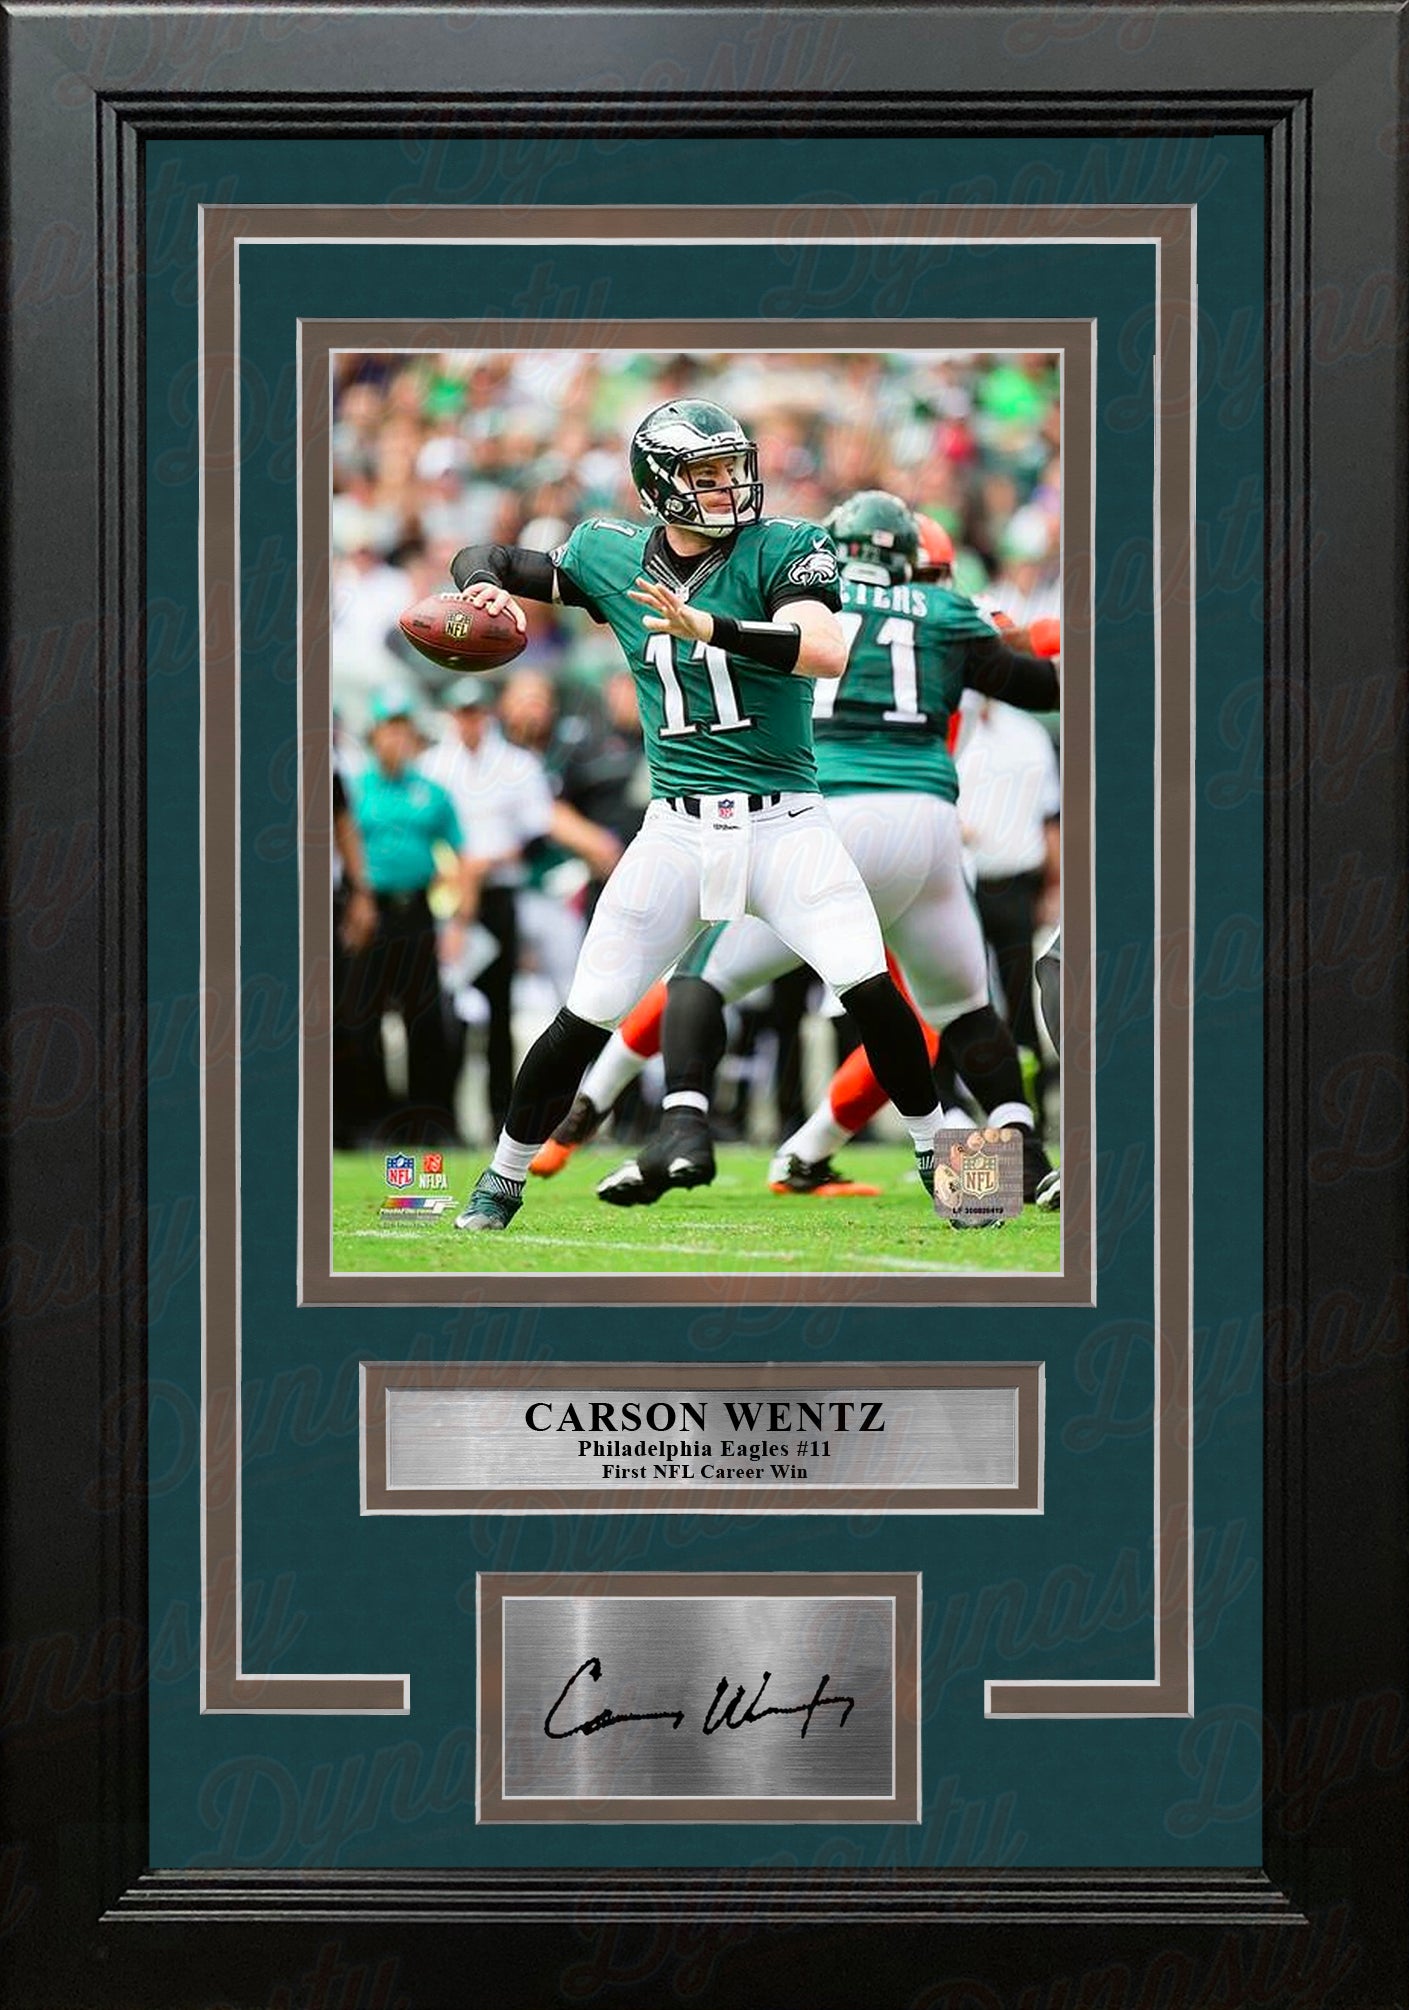 Carson Wentz First Career Win Philadelphia Eagles NFL Football Framed Photo with Engraved Autograph - Dynasty Sports & Framing 